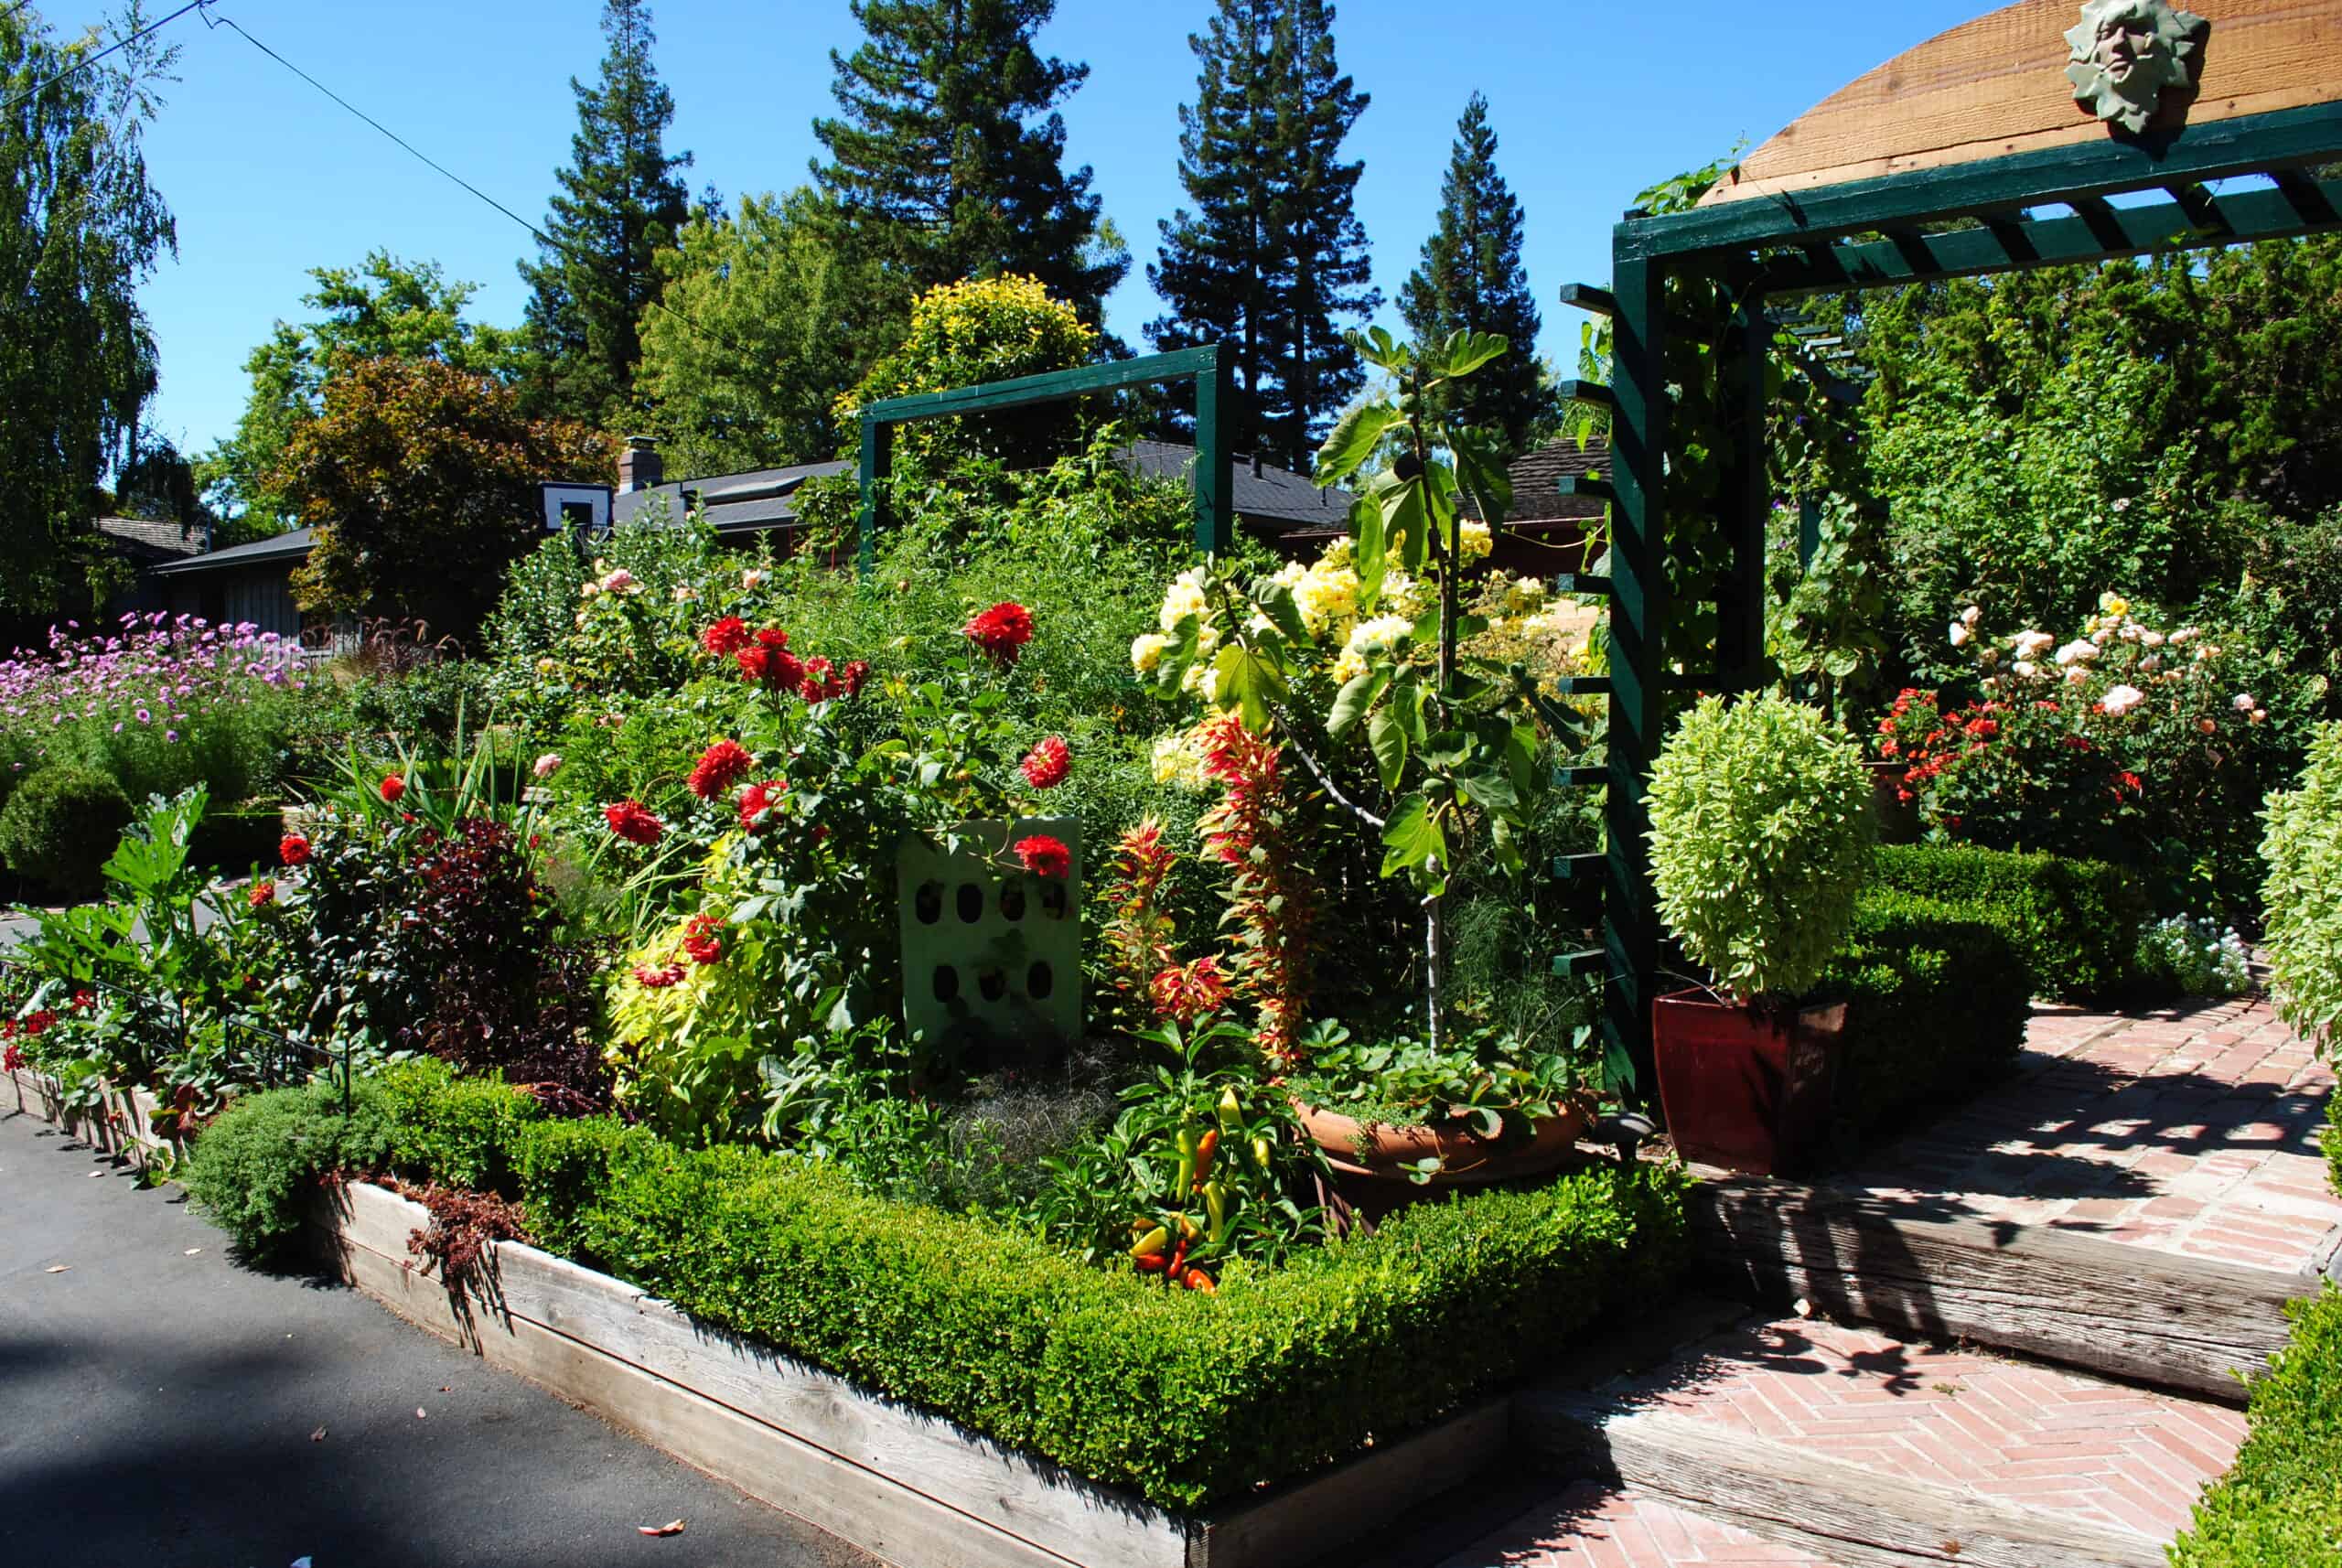 Cultivating Food in Your Own Back or Frontyard